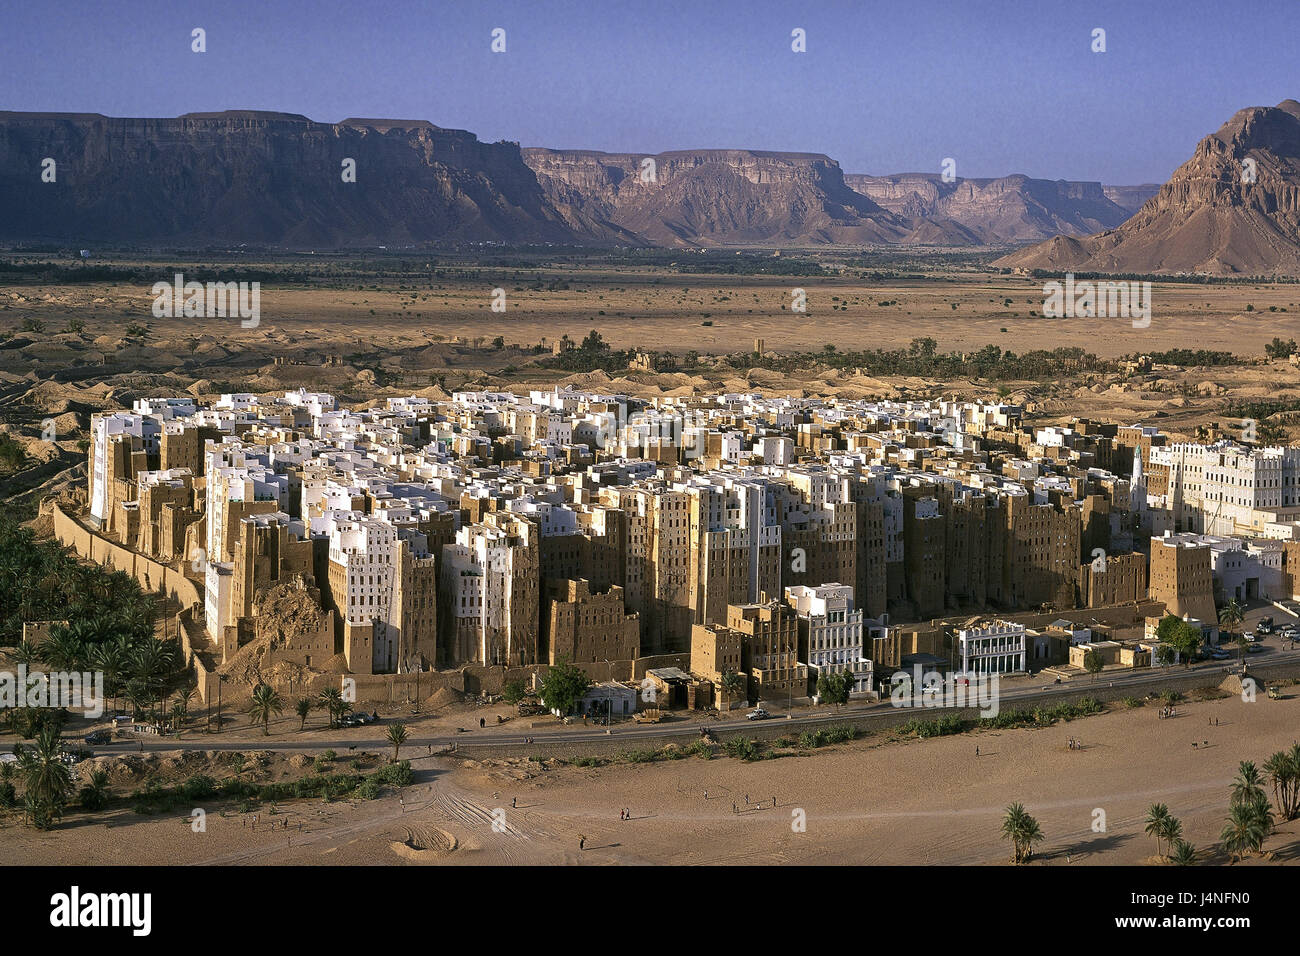 Yemen, wadi Hadramaut, Schibam, town overview, the Near East, Shibam, Yemen, East, Hadhramaut, Hadramut, town, architecture, historically, building, mucky building, mucky houses, UNESCO-world cultural heritage, Stock Photo